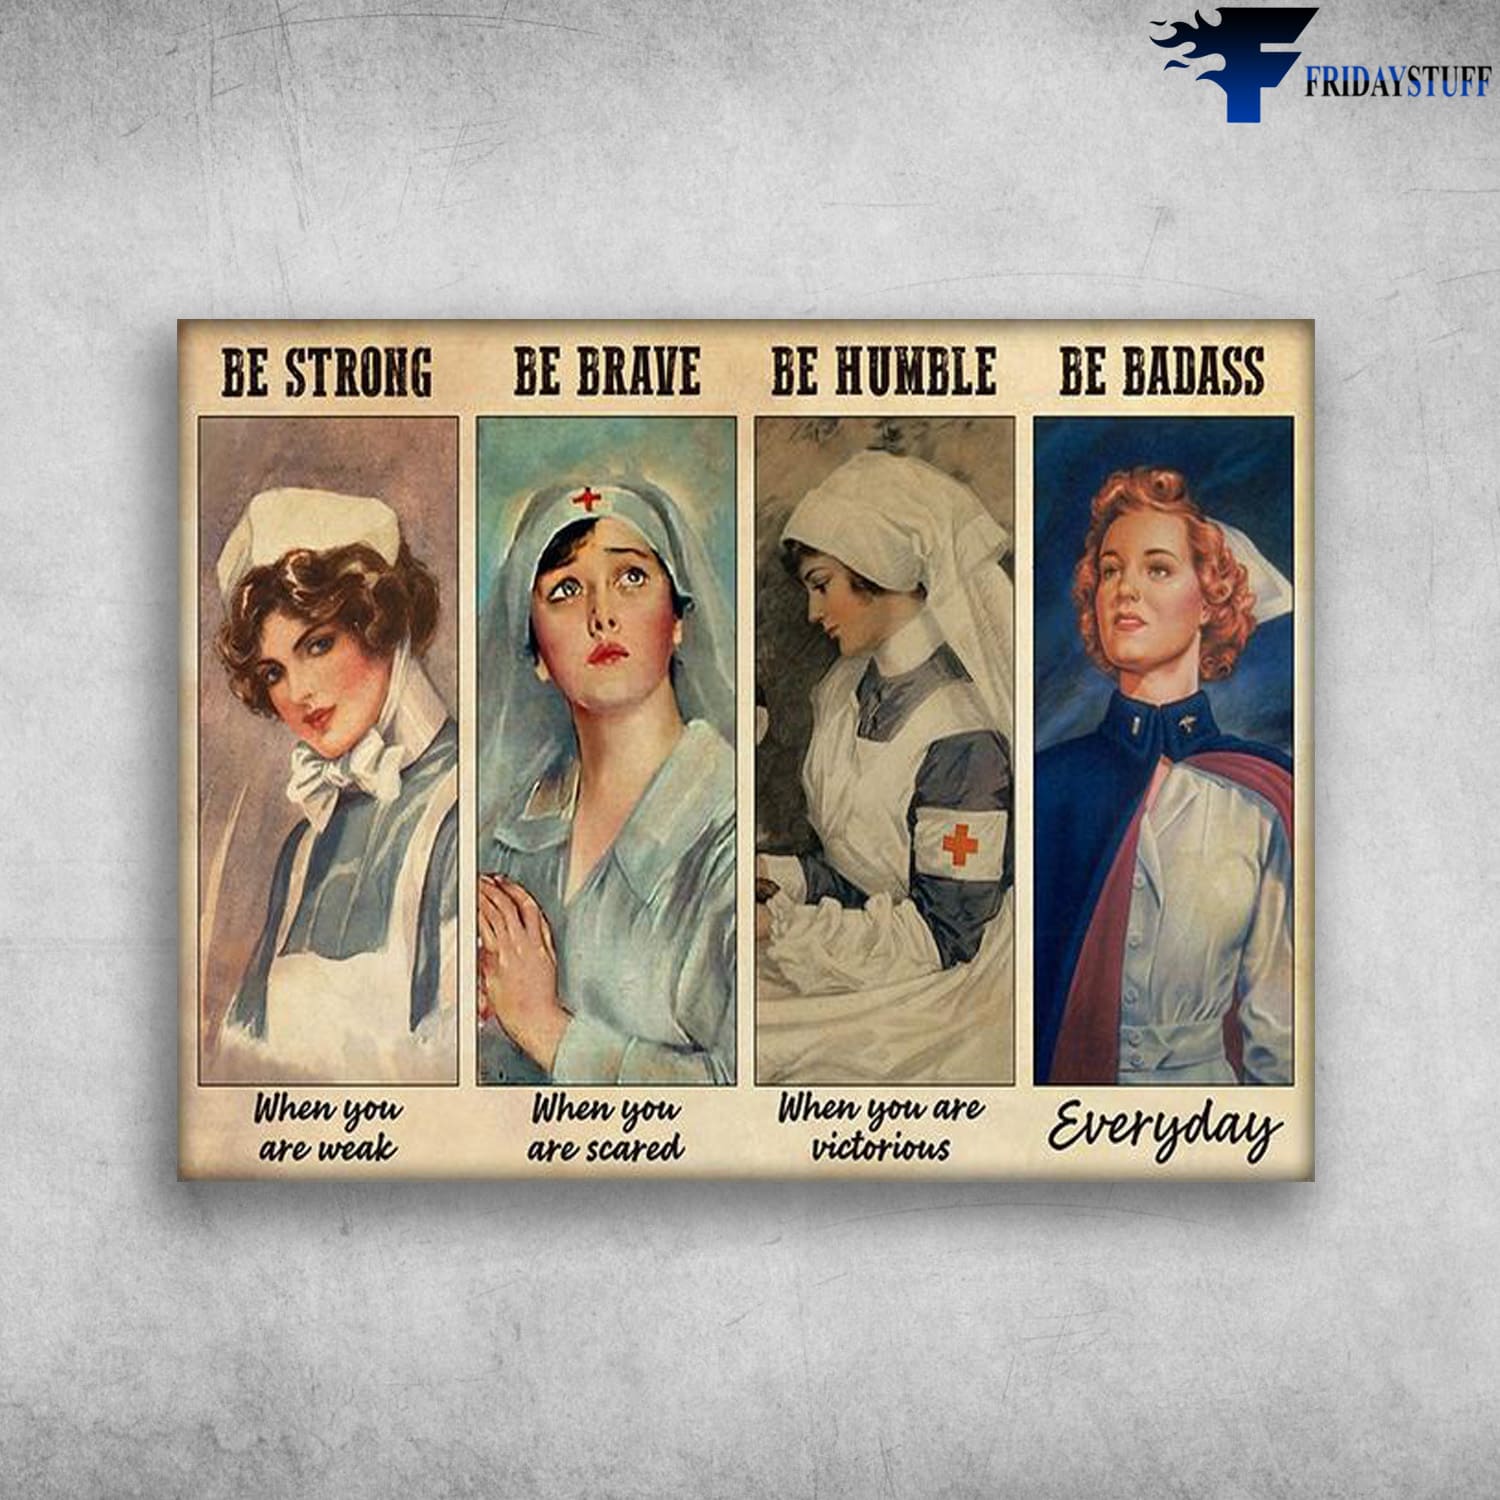 Nurse Poster, Gift For Nurse, Be Strong When You Are Weak, Be Brave When You Are Scared, Be Humble When You Are Victorious, Be Badass Everyday